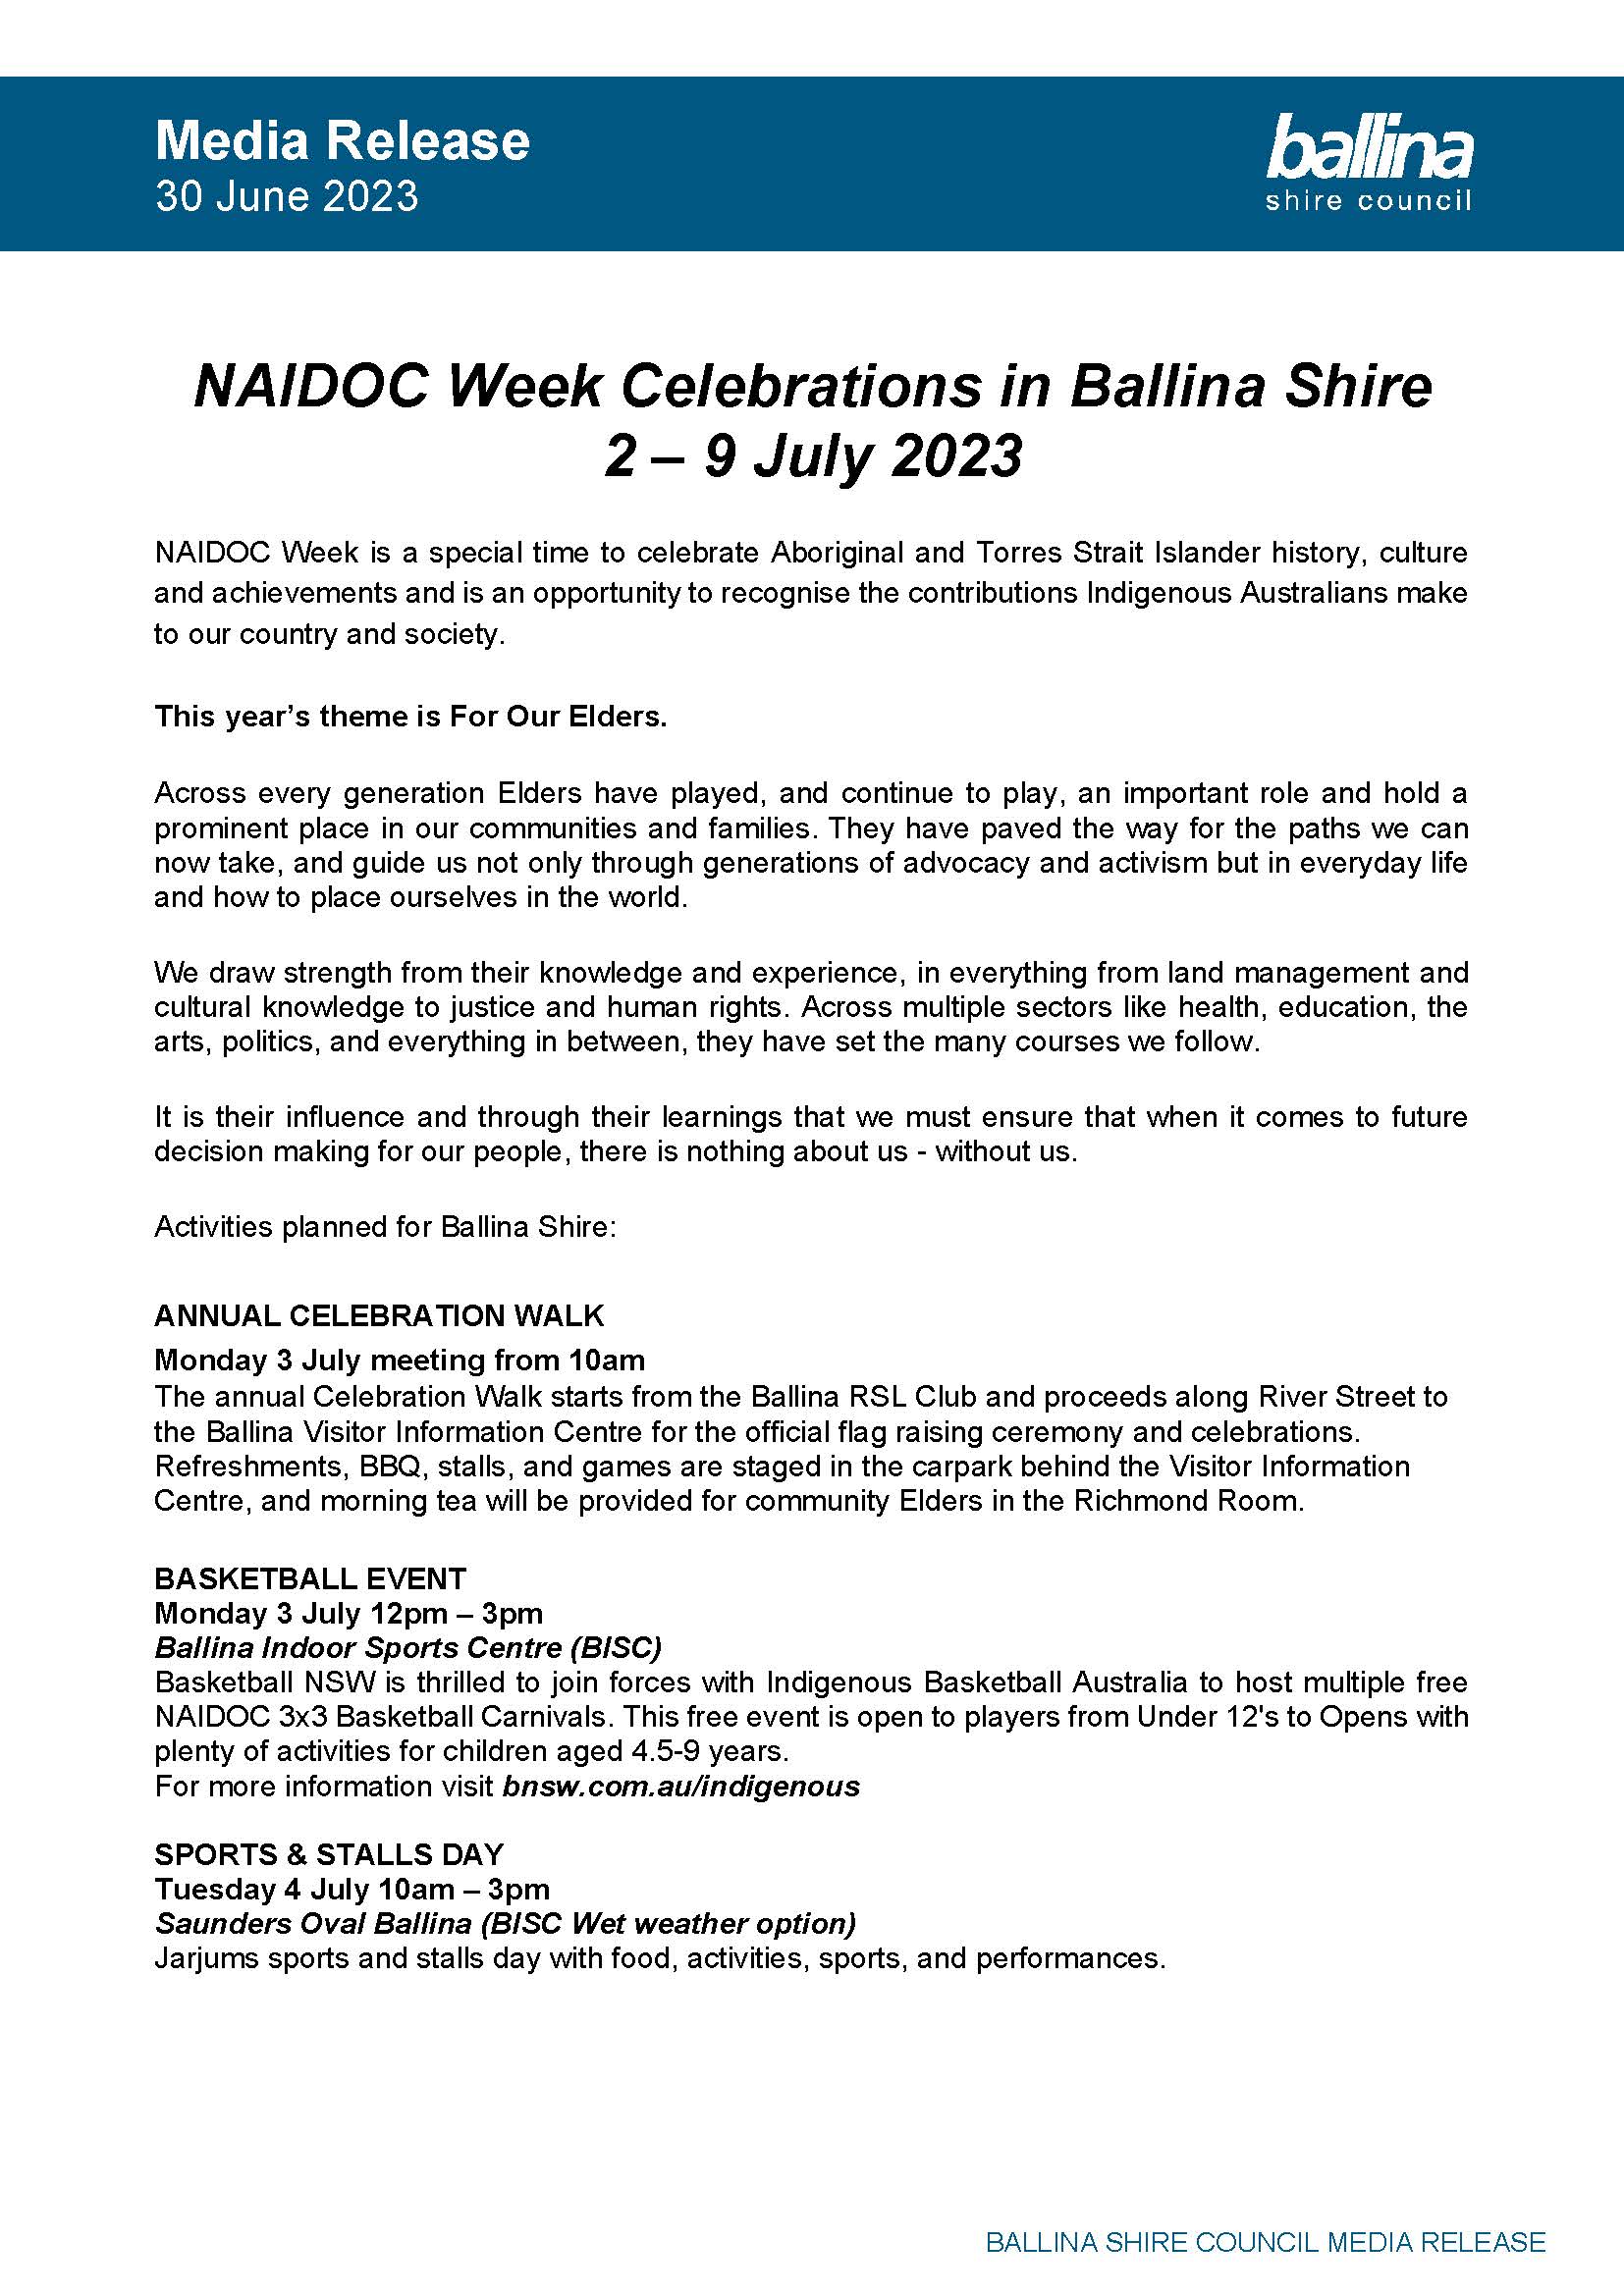 Media Release - NAIDOC Week Celebrations in Ballina Shire - 2-9 July 2023_Page_1